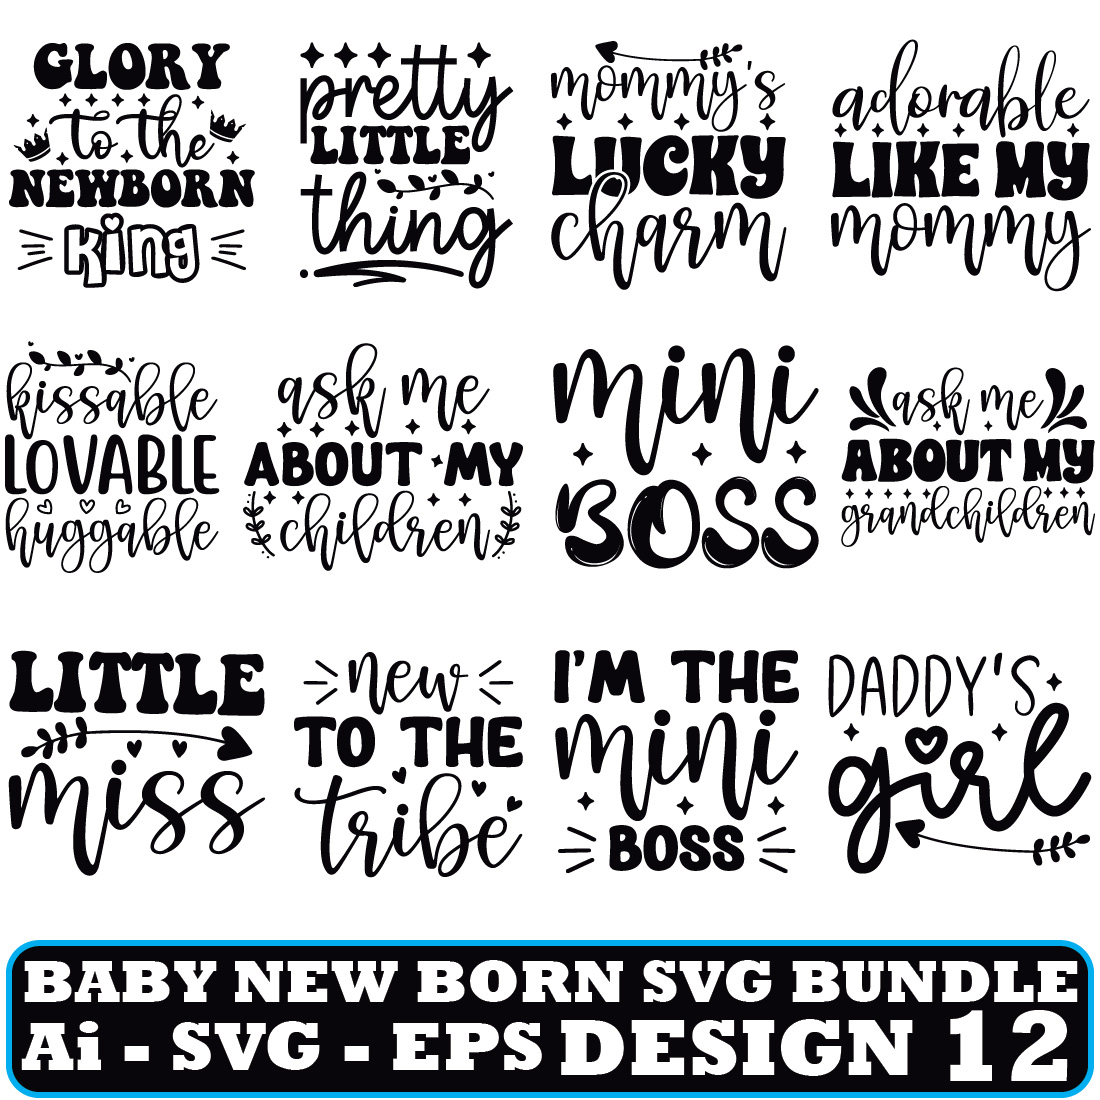 Baby New Born SVG Bundle cover image.